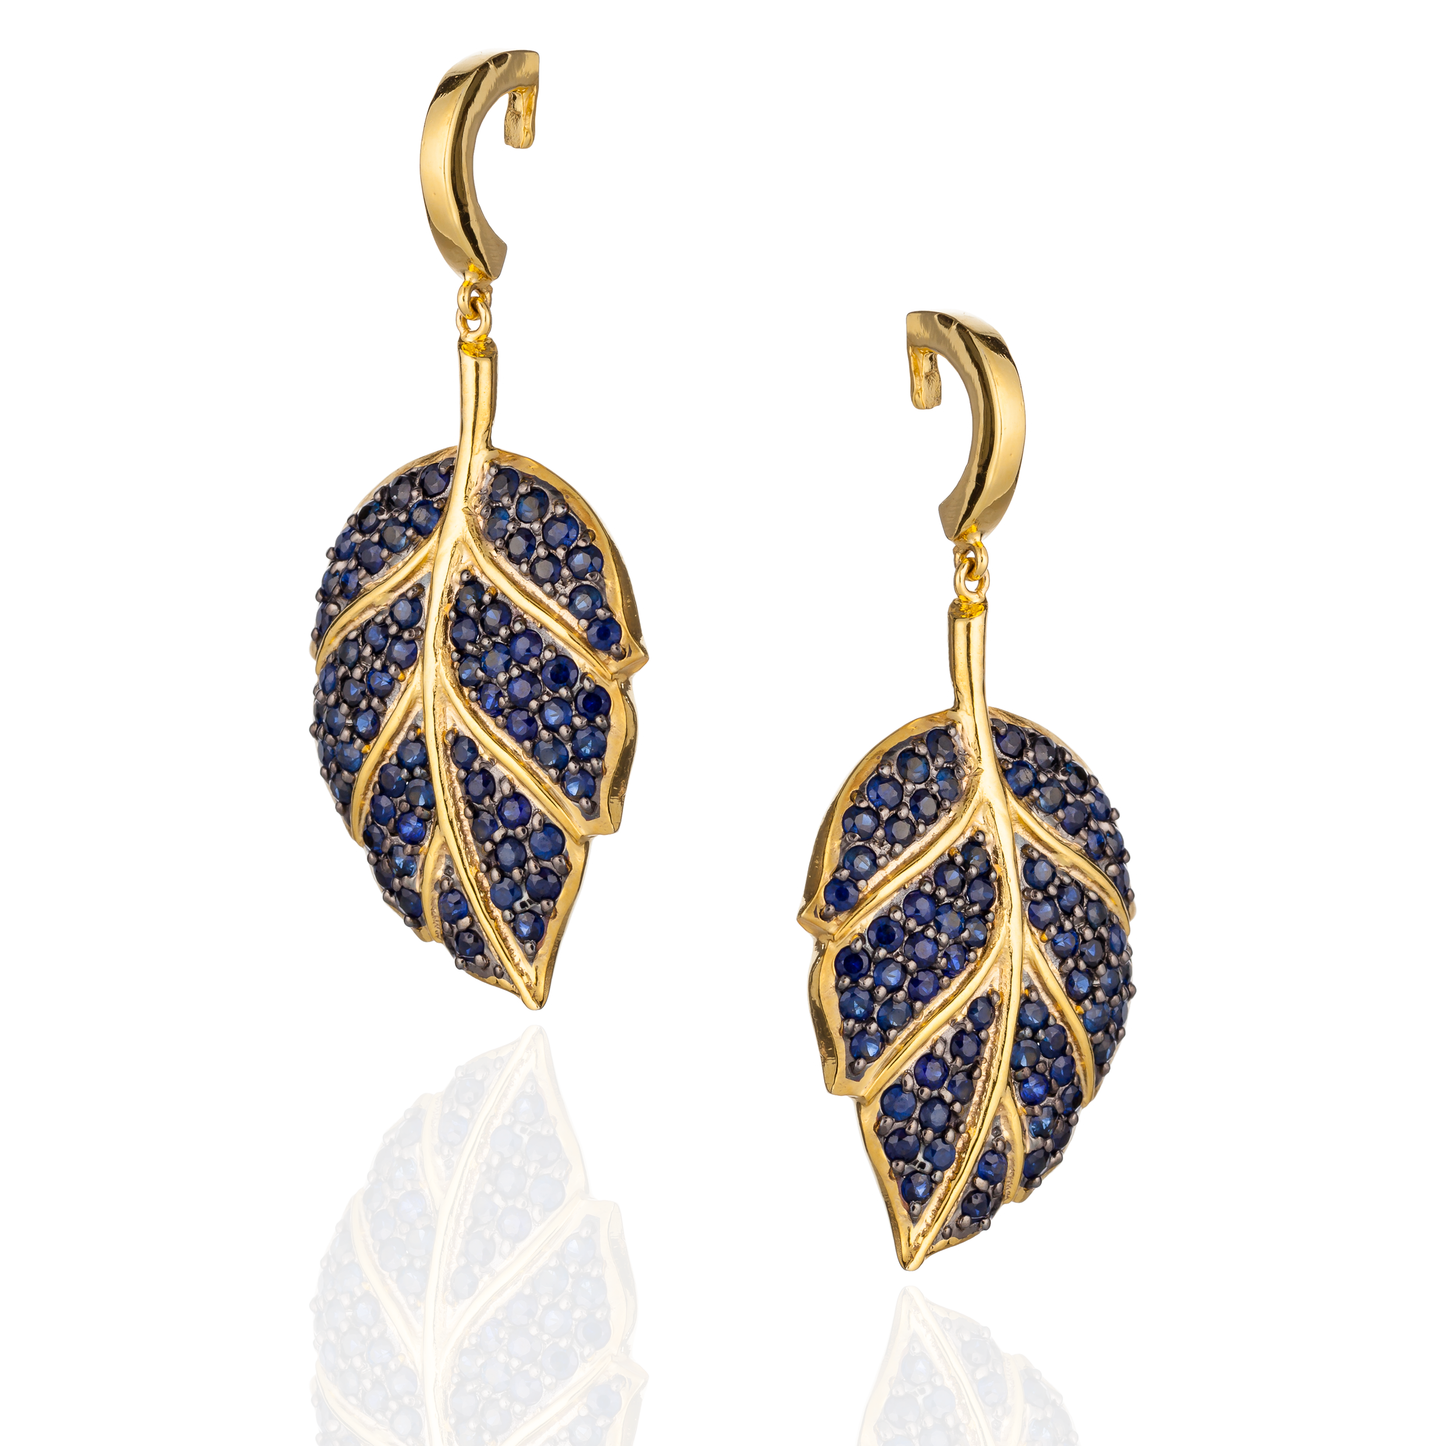 925 Silver Leaf Earings with Blue Sapphire Pavé.